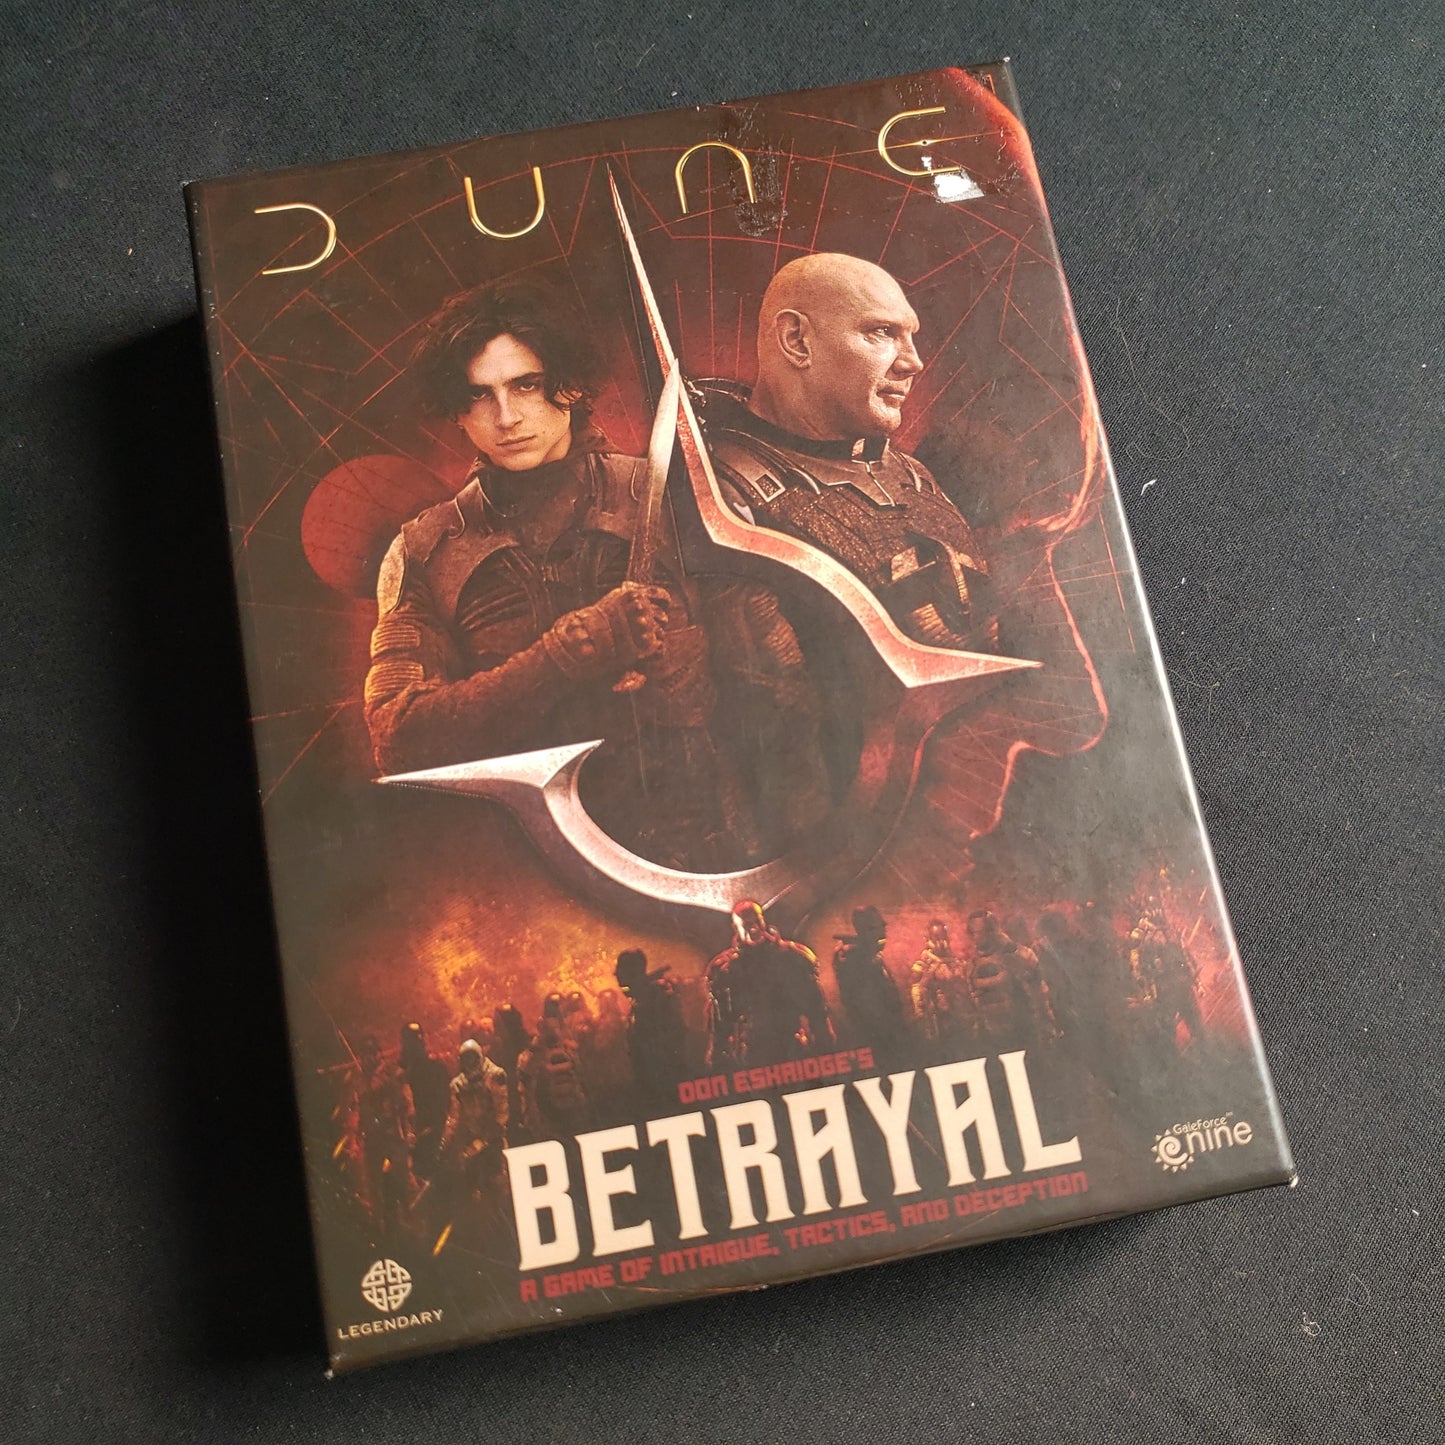 Image shows the front cover of the box of the Dune: Betrayal card game